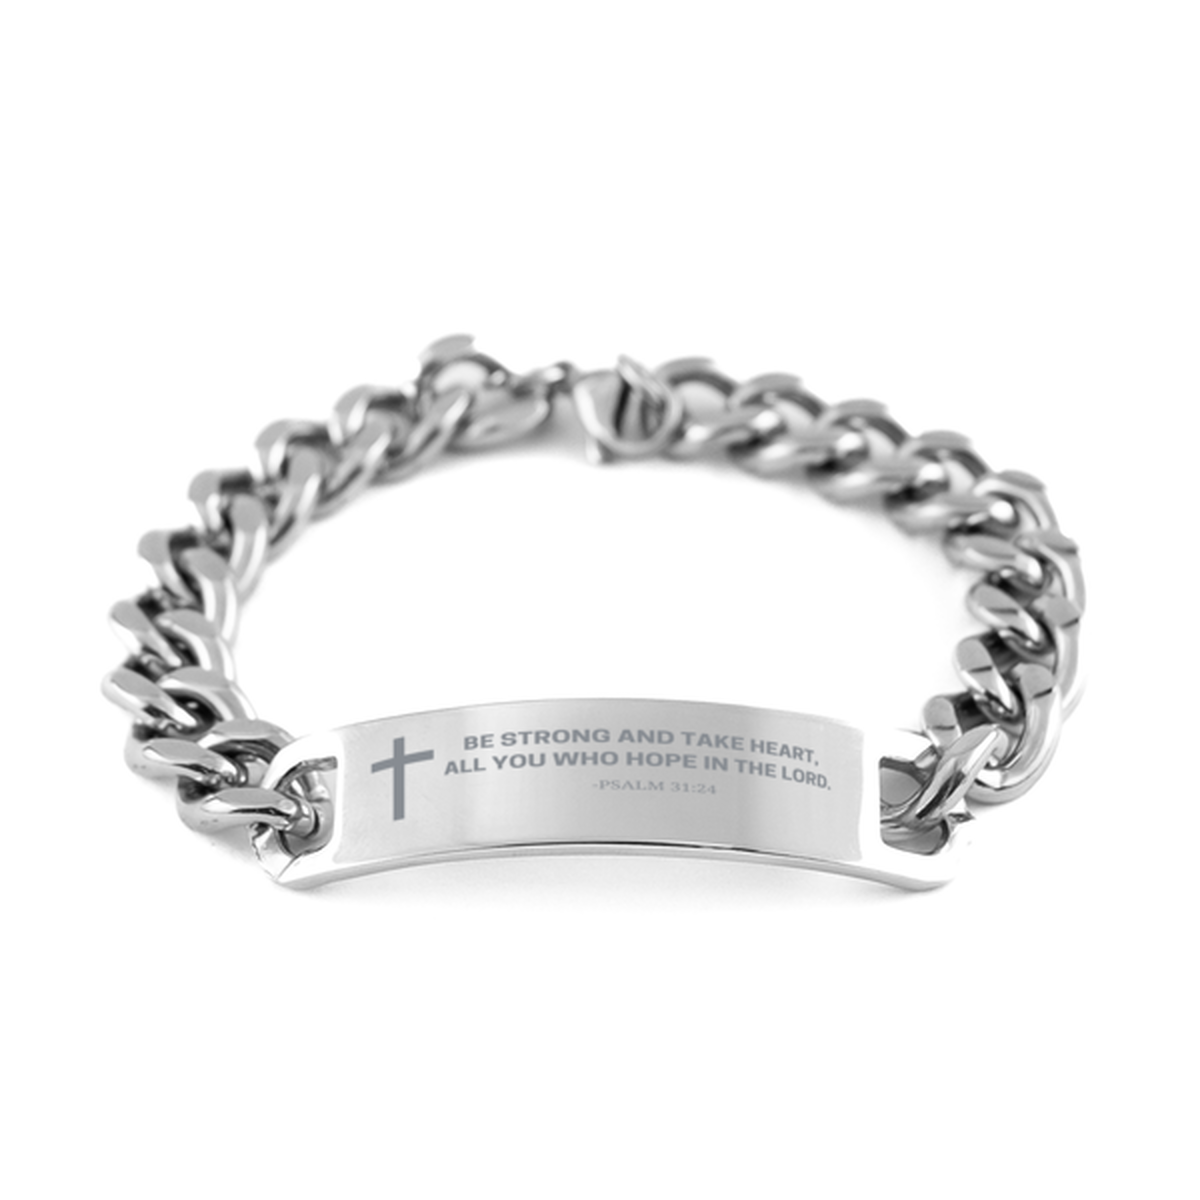 Baptism Gifts For Teenage Boys Girls, Christian Bible Verse Cuban Chain Bracelet, Be strong and take heart, Catholic Confirmation Gifts for Son, Godson, Grandson, Nephew